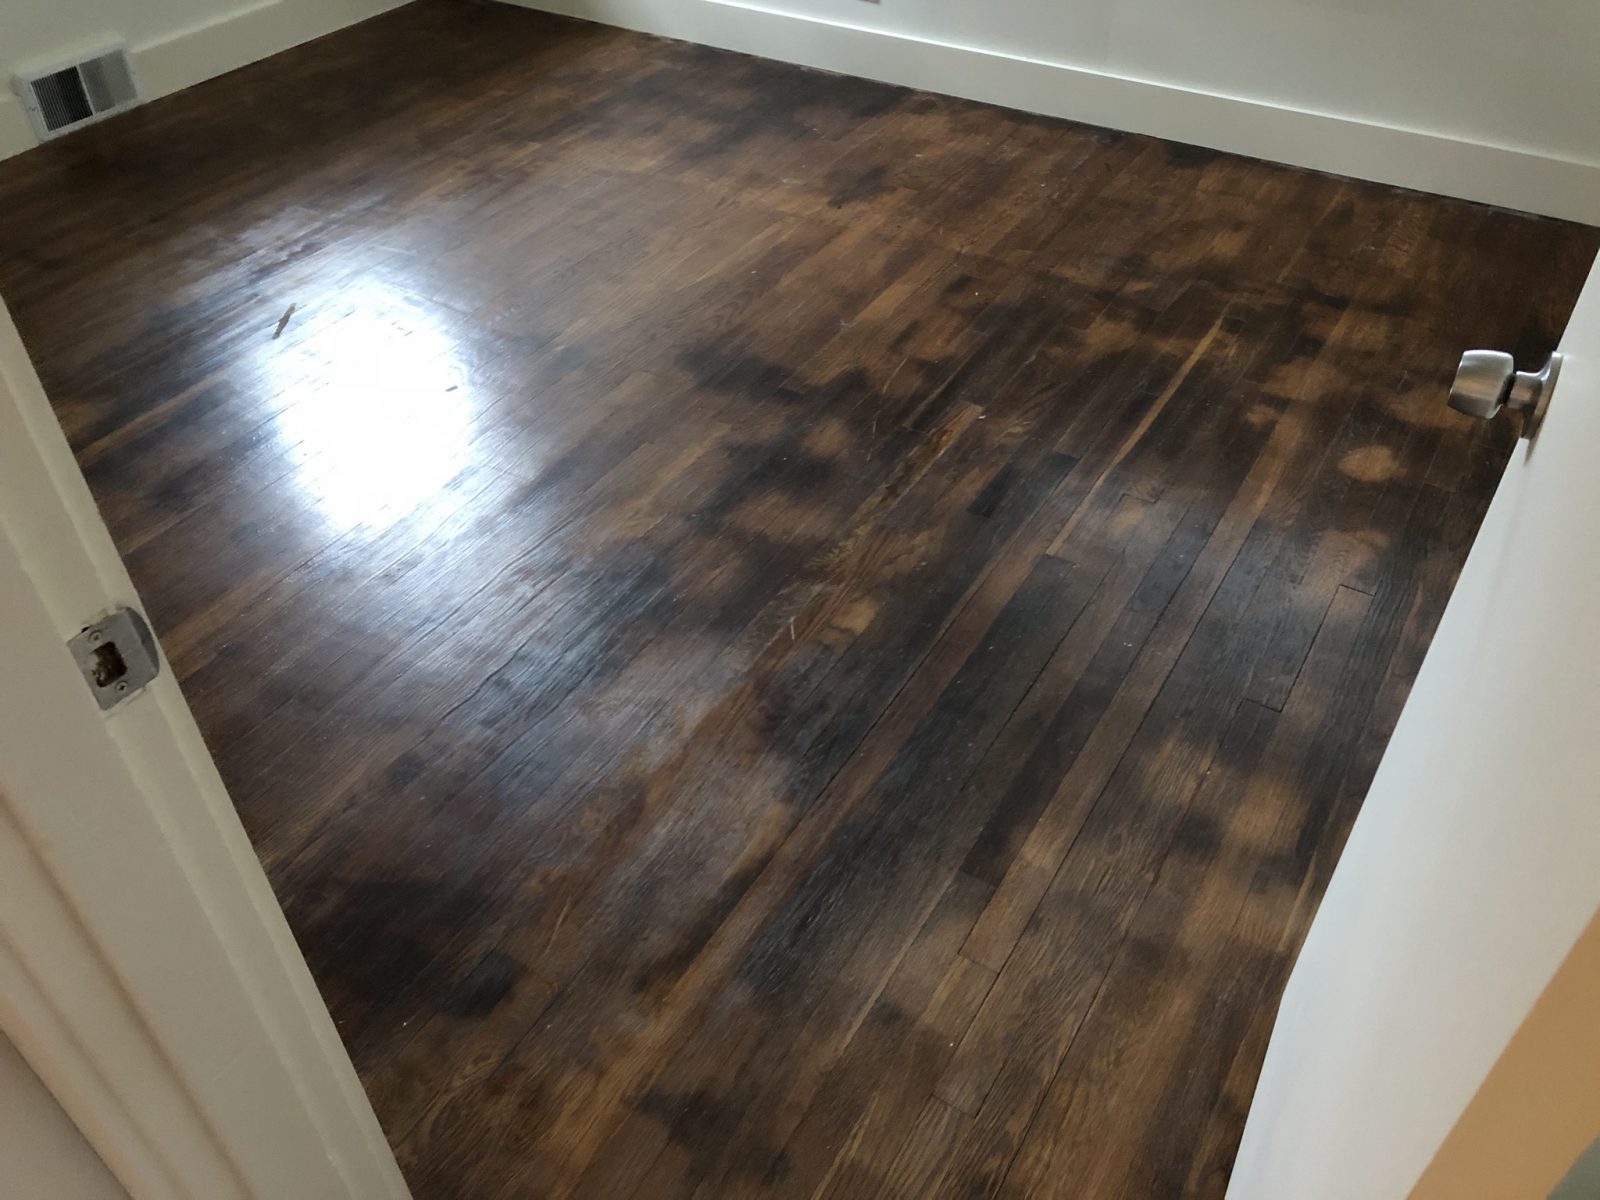 Professional Hardwood Floor Cleaning Indian Hill Ohio by Howards Cleaning Service